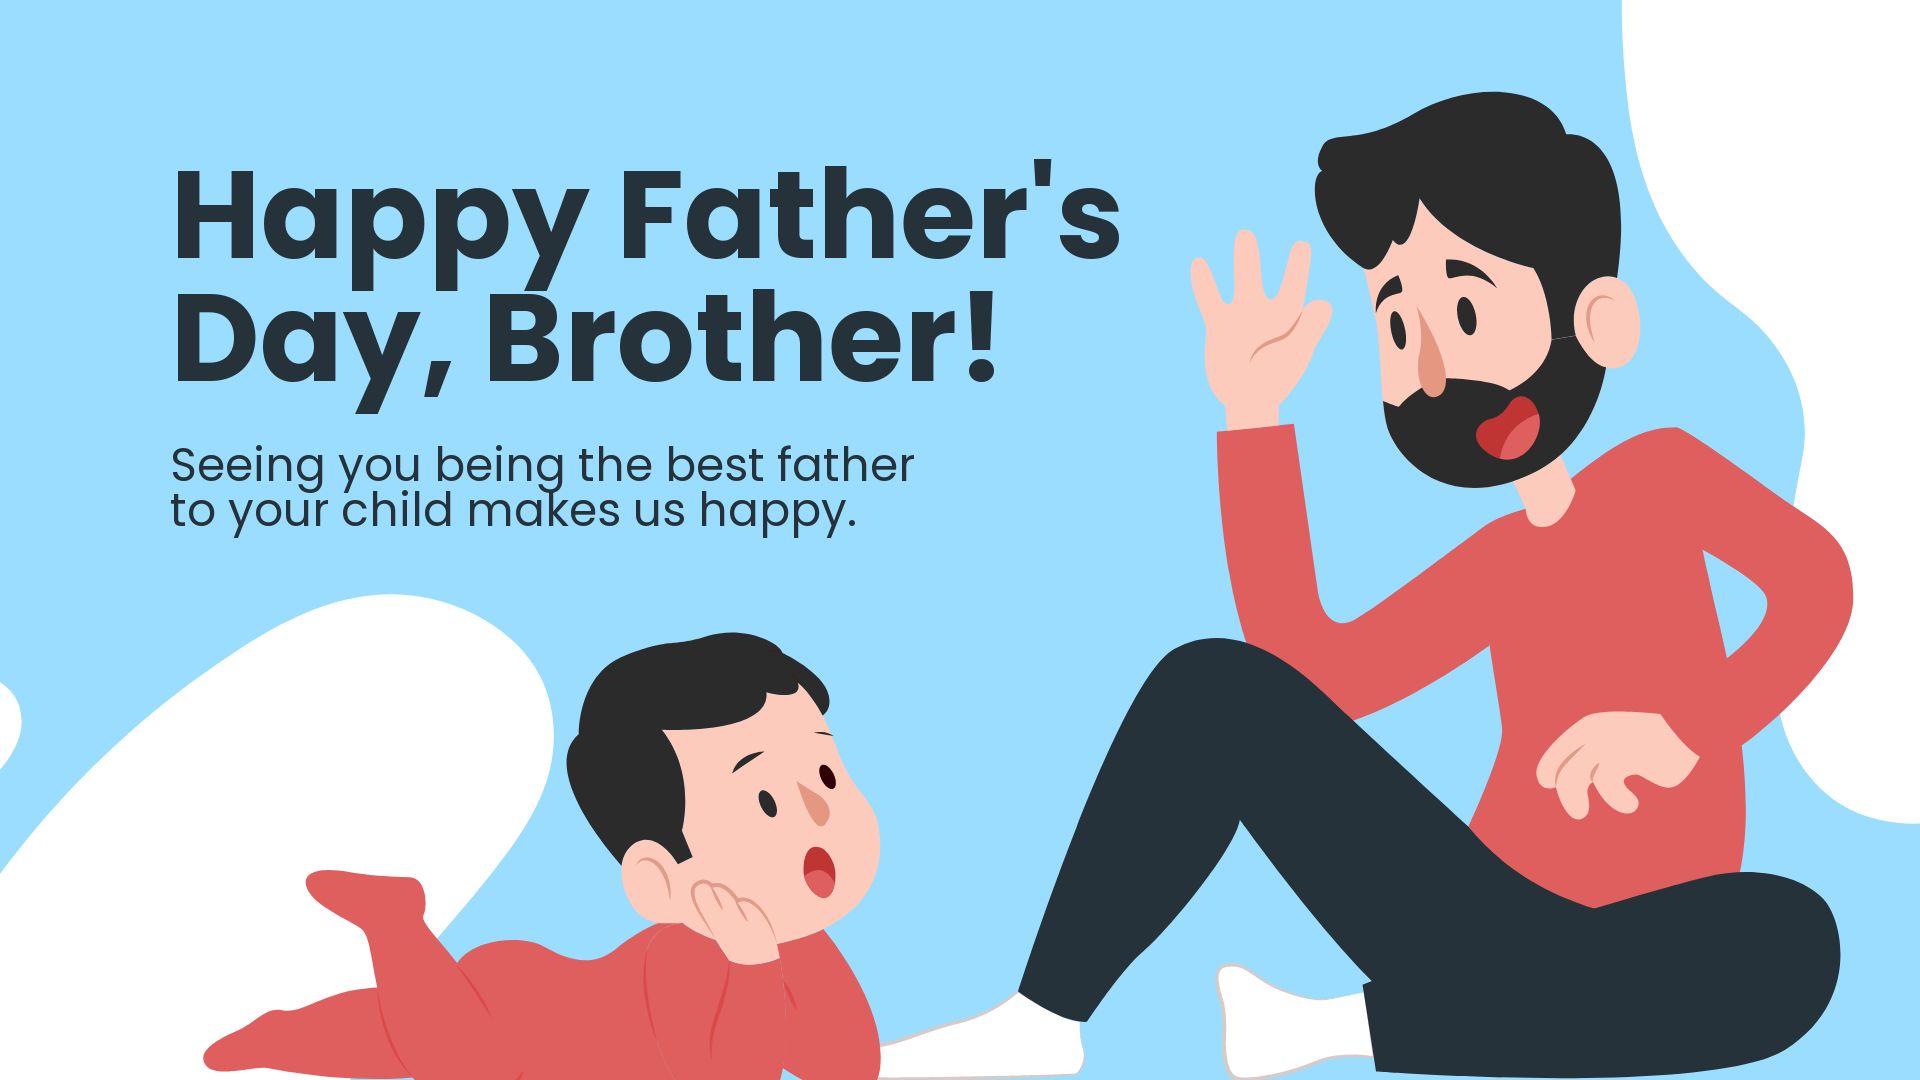 Happy Father's Day Brother Image